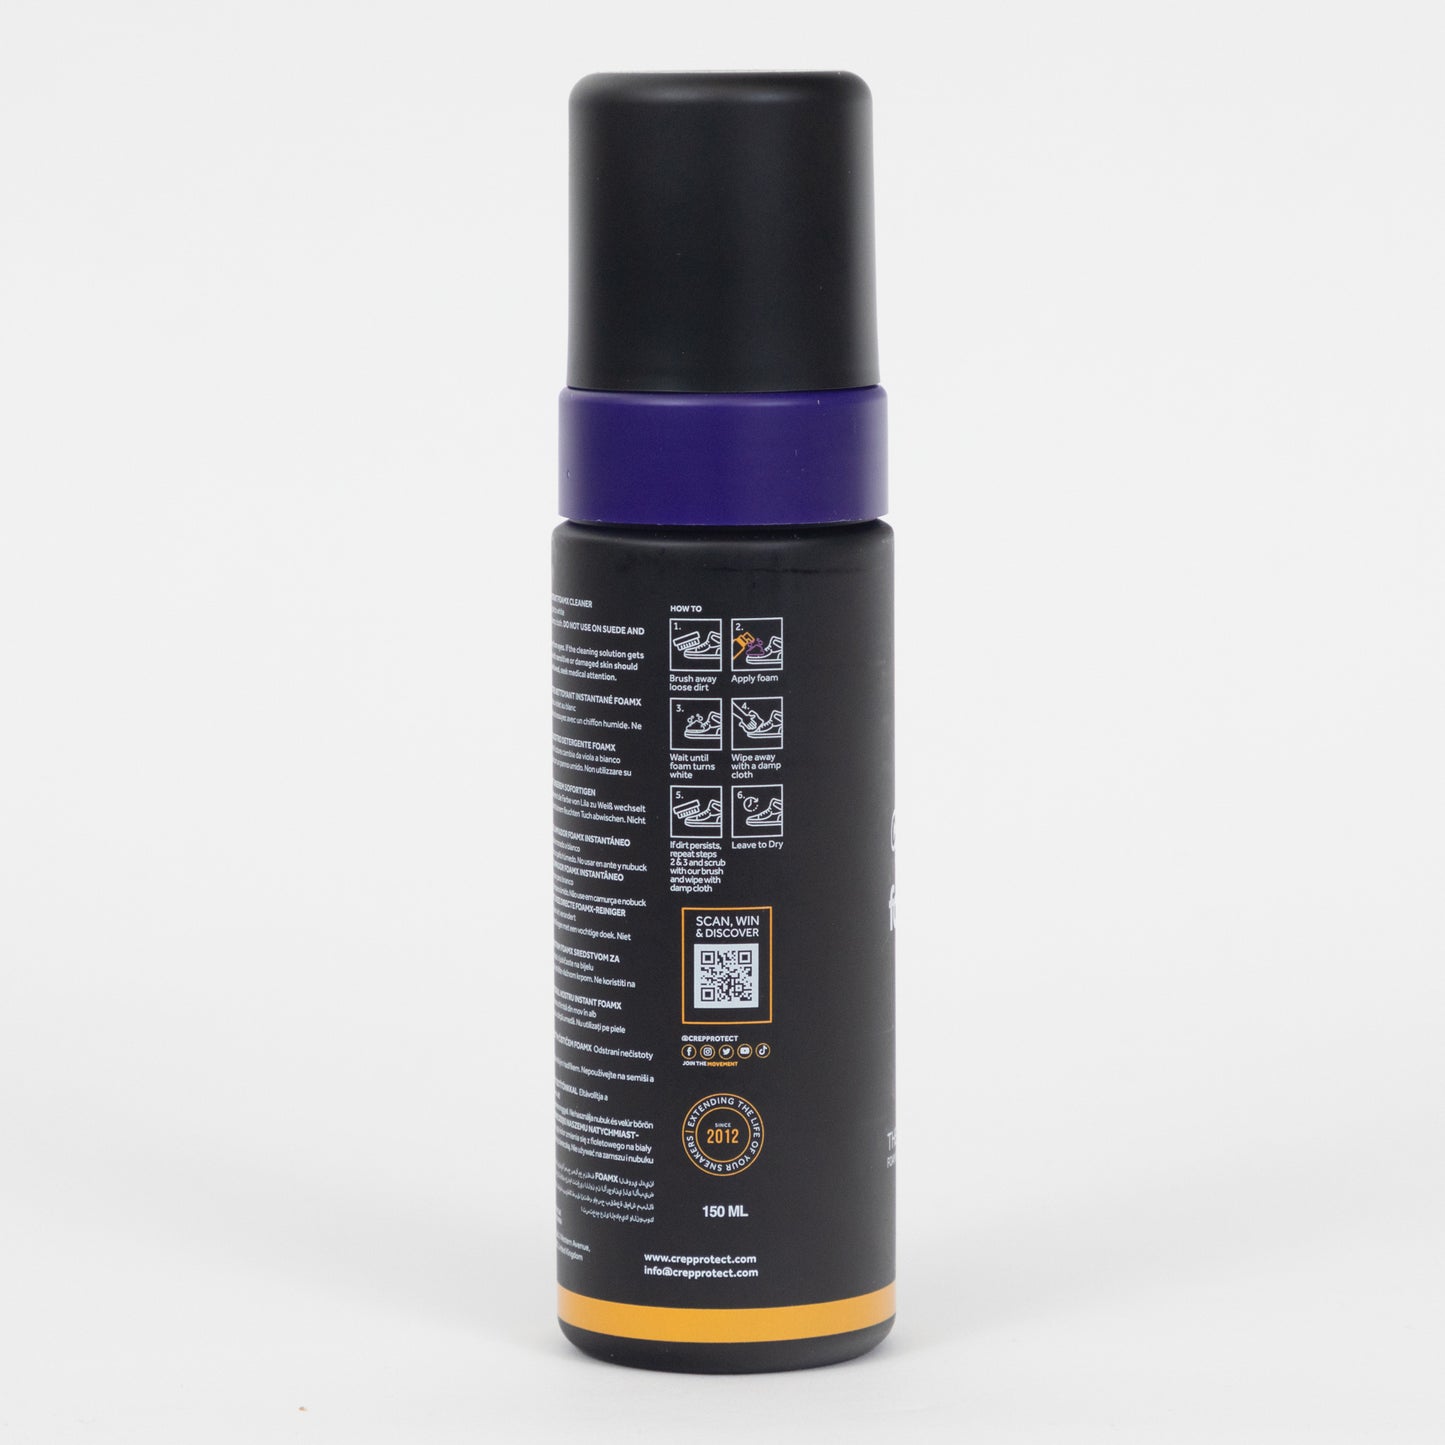 CREP PROTECT 150ml Foam X Shoe Cleaning Solution